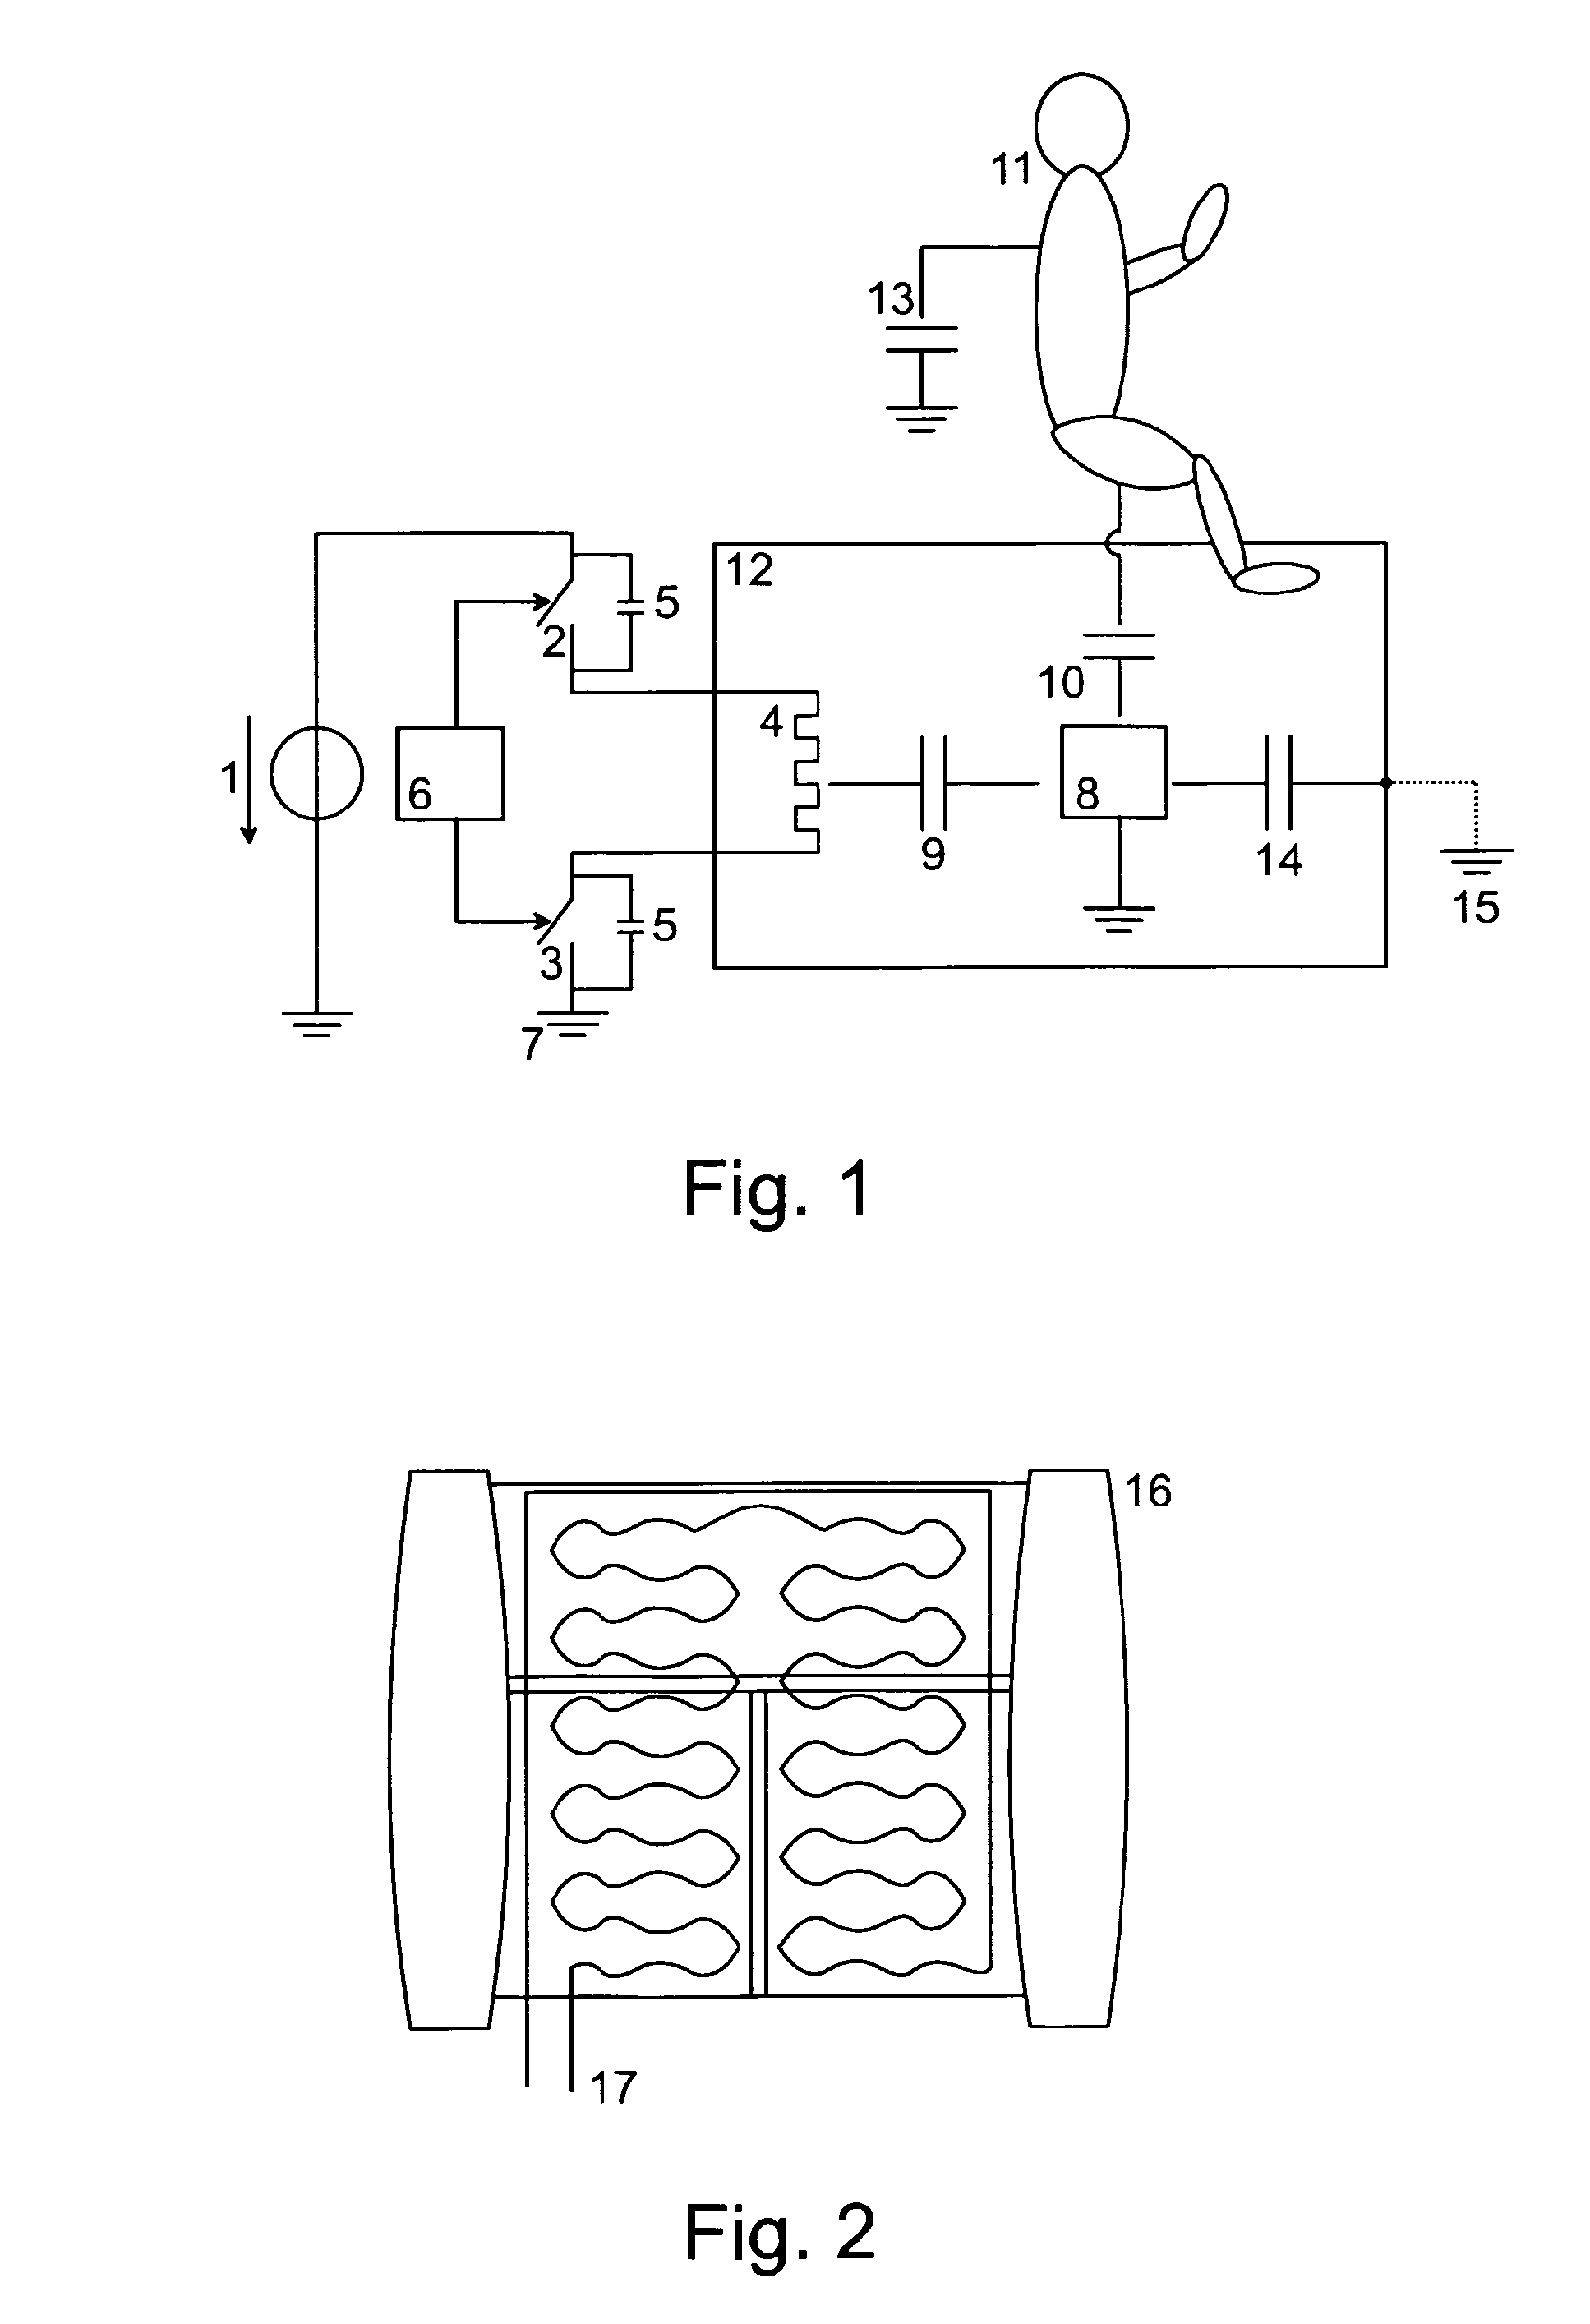 Capacitive occupant detection system